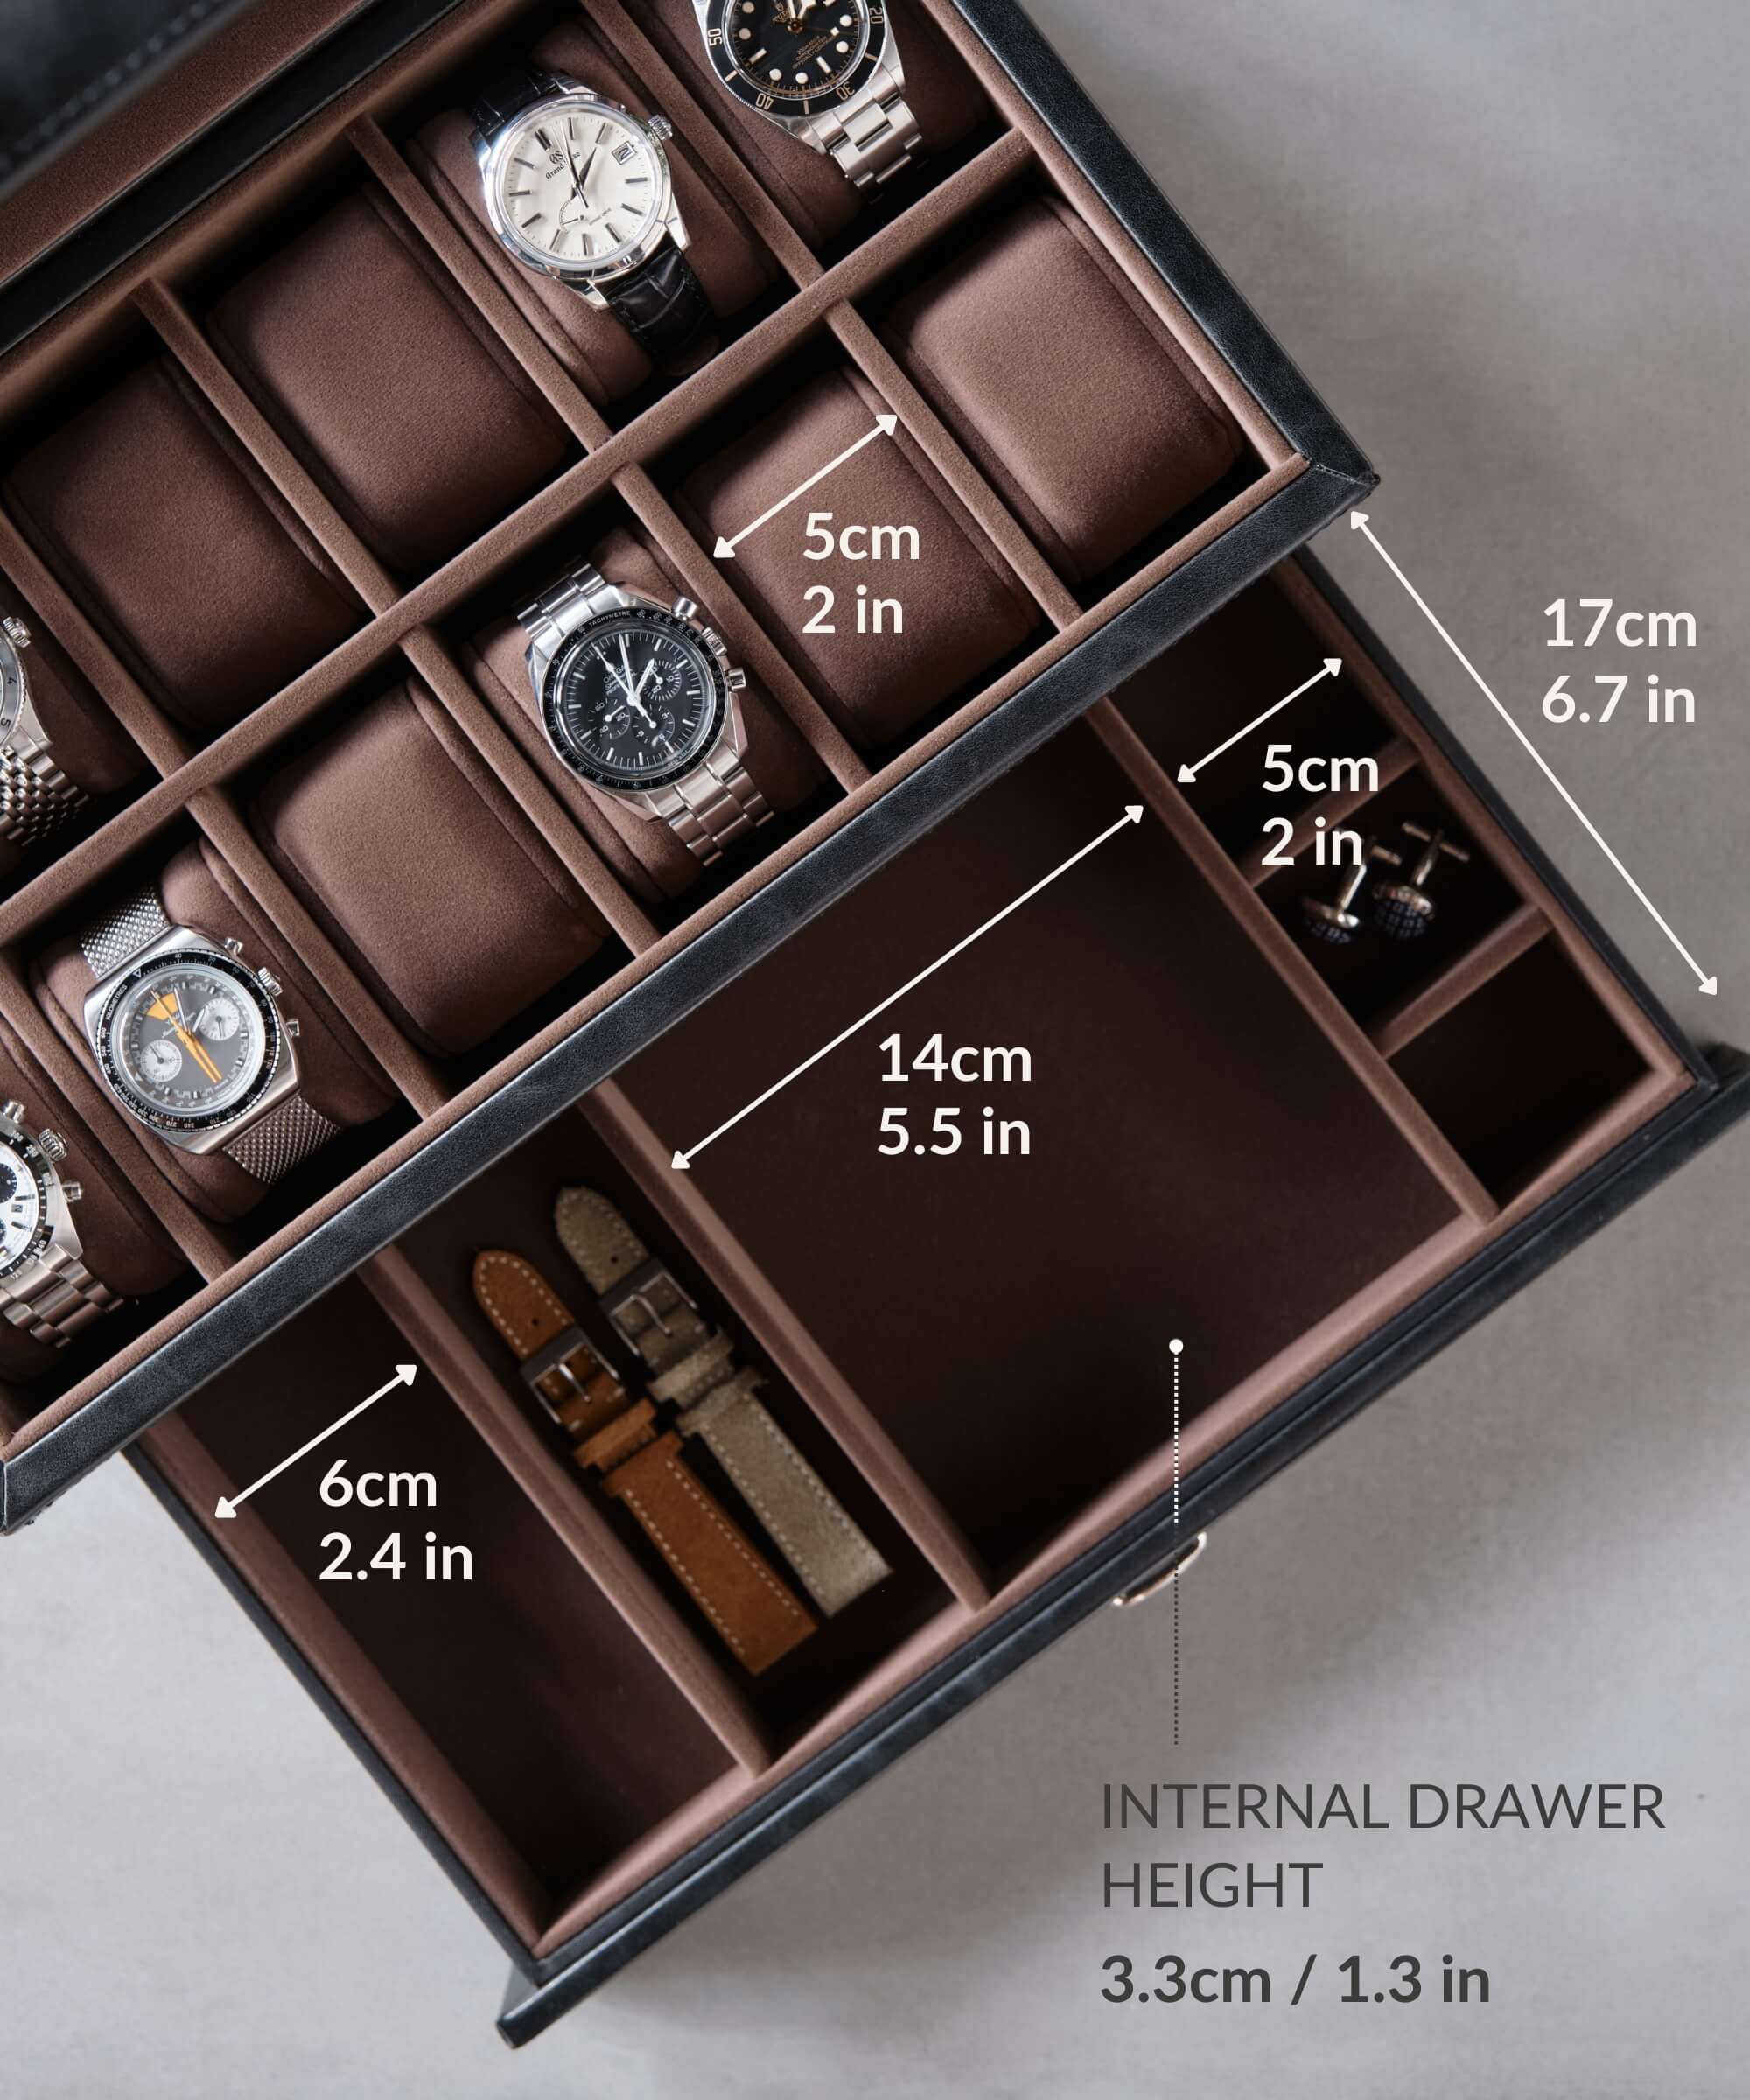 A TAWBURY Bayswater 12 Slot Watch Box with Drawer - Black with a number of timepieces in it for convenient storage.